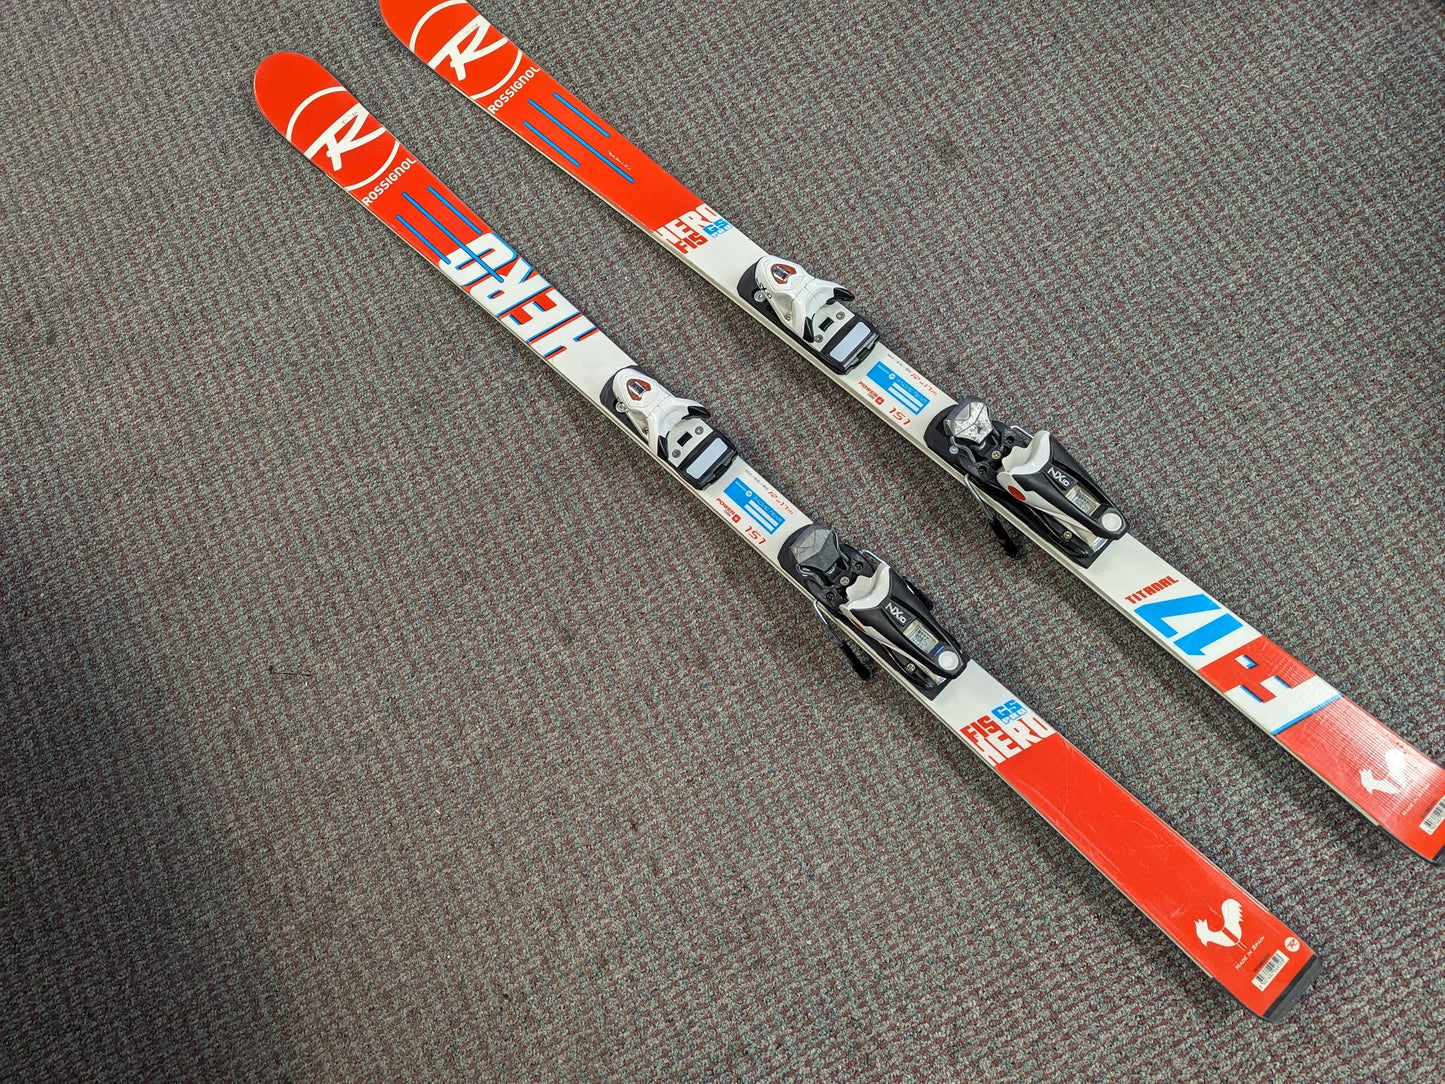 Rossignol Hero GS Pro Skis w/Look Bindings Size 151 Cm Color Orange Condition Used